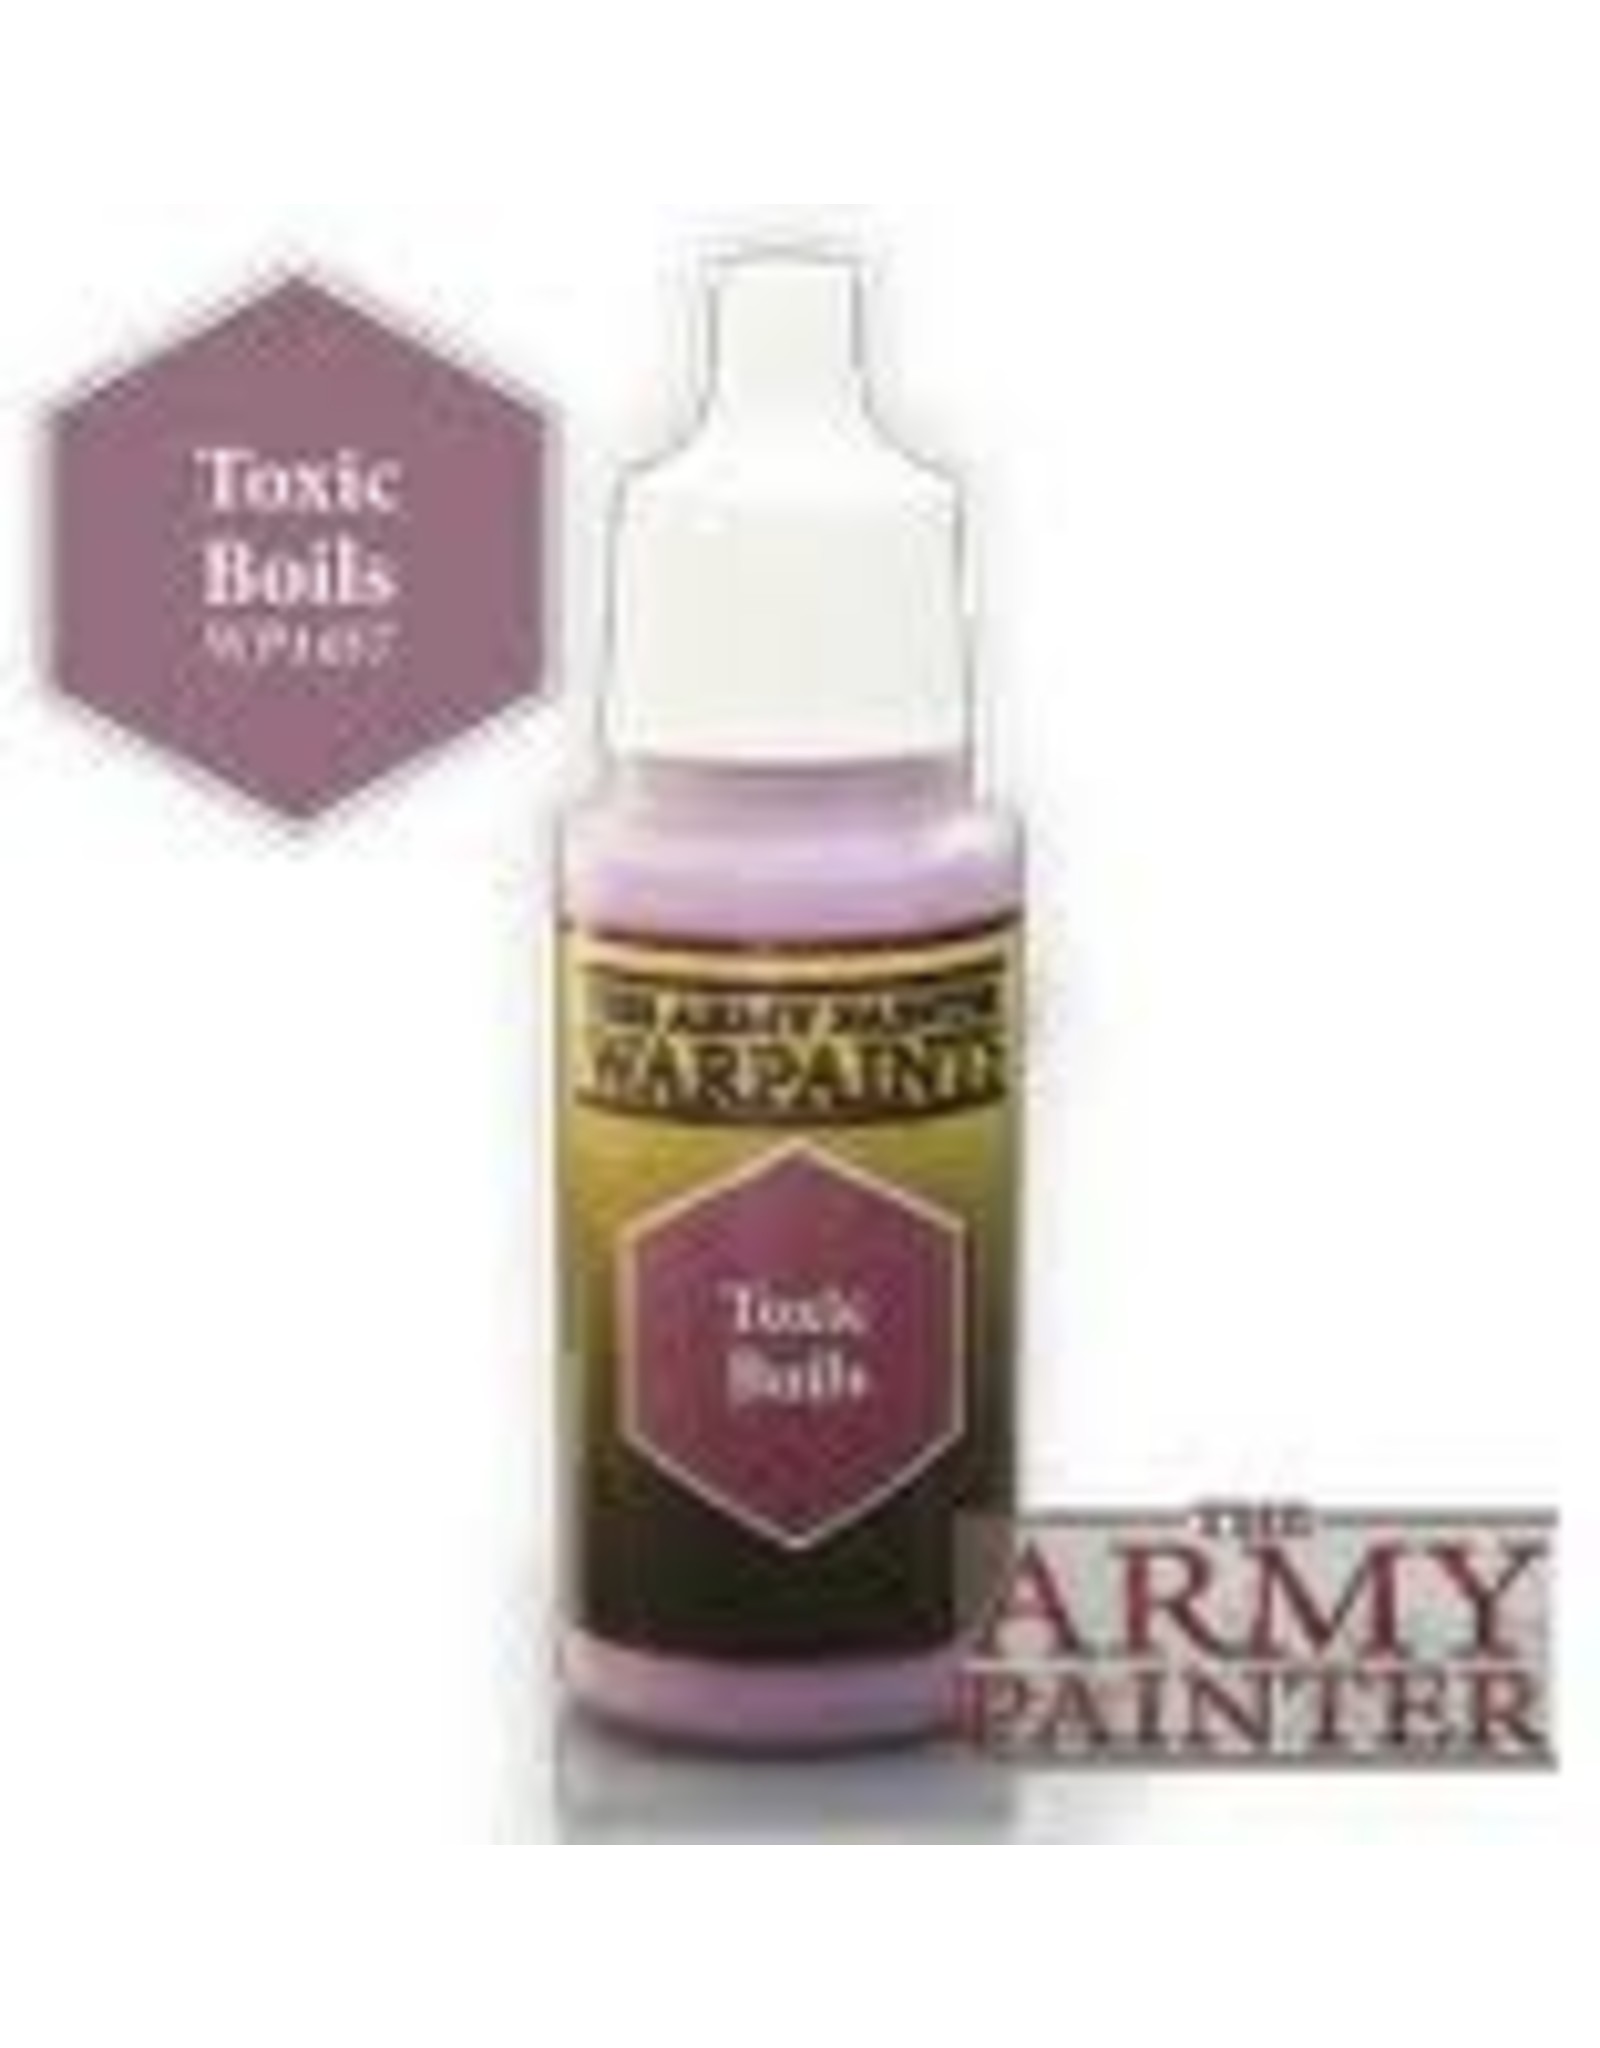 Army Painter Army Painter: Toxic Boils